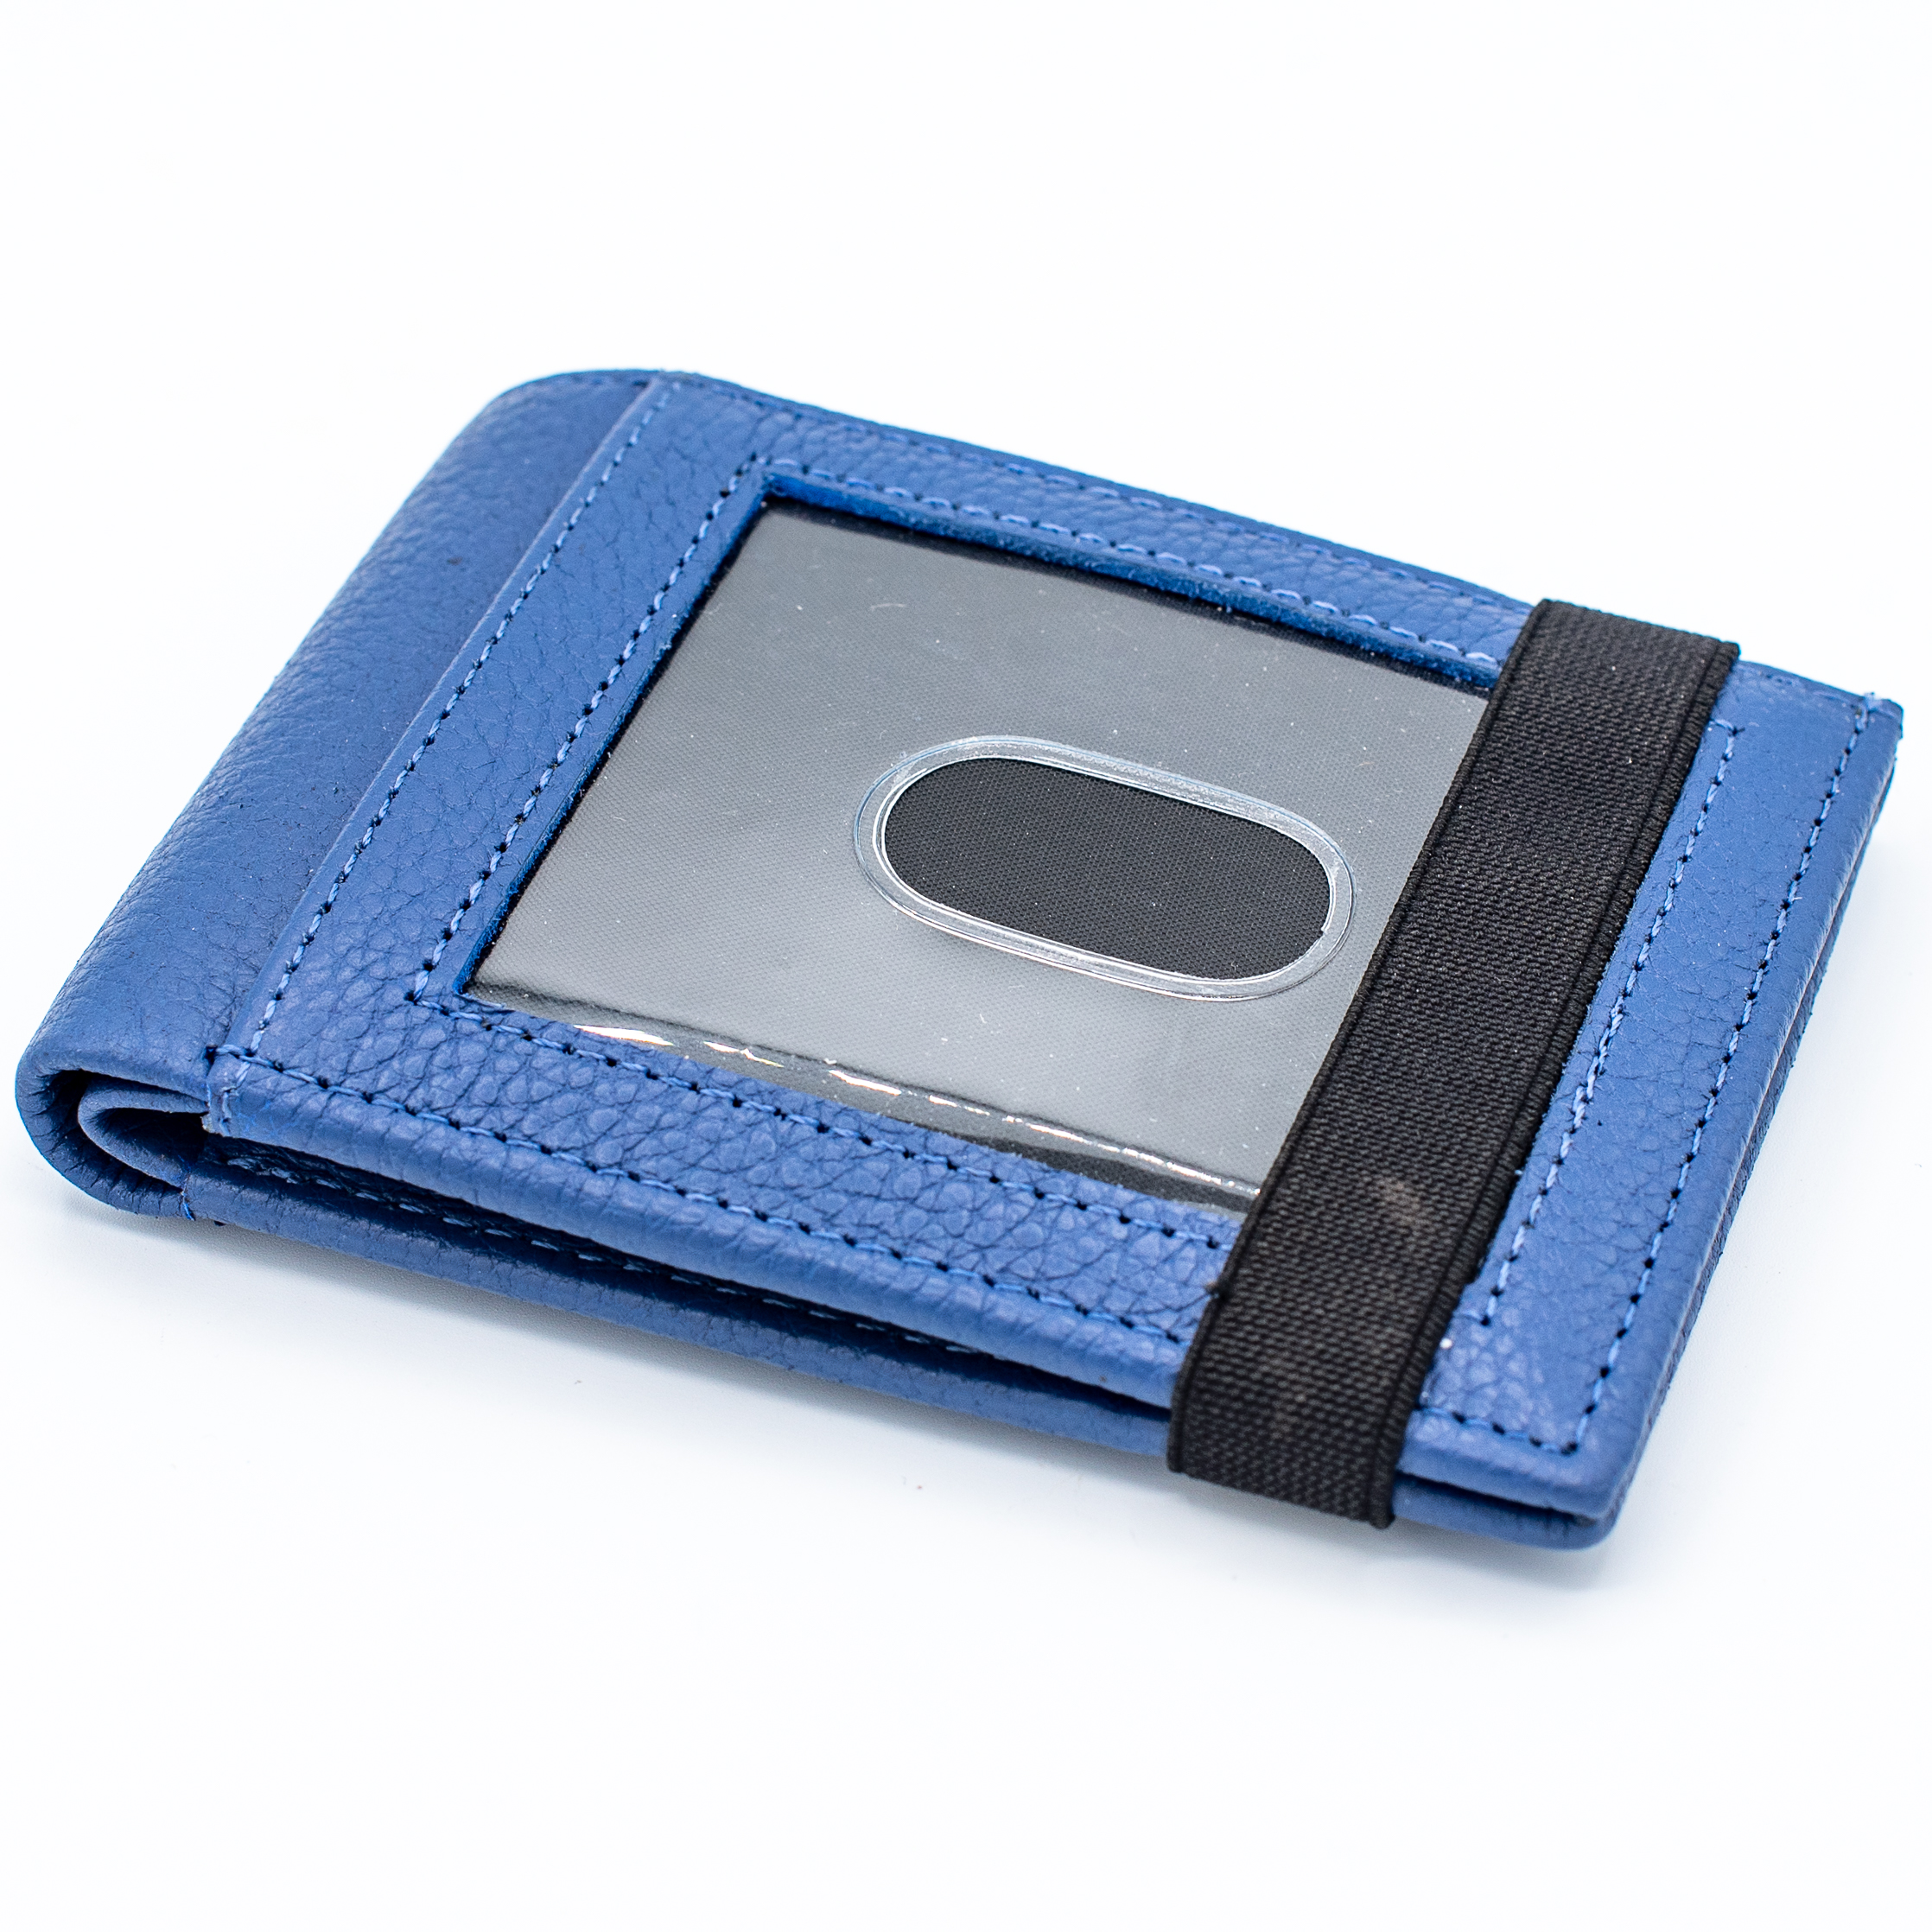 RFID Safe Biker Men's Soft Leather Bifold Chain Wallet with Elastic Card Case Navy - image 4 of 5